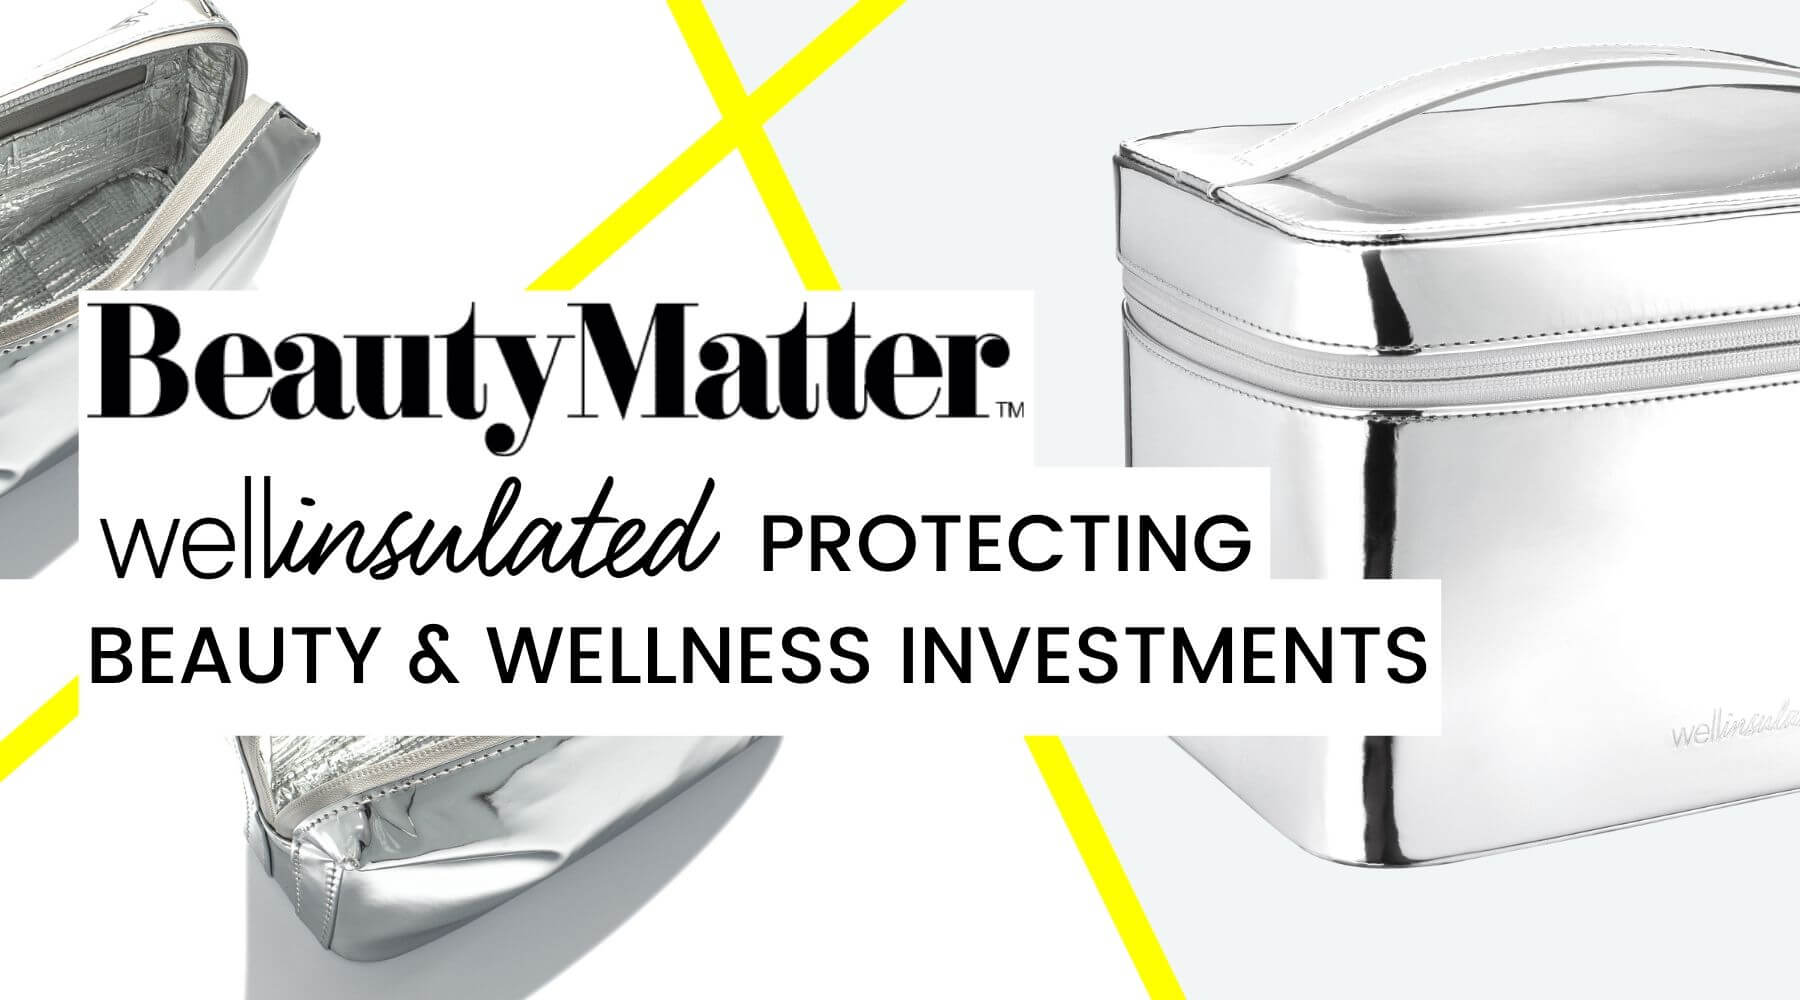 Interview with Our Founder: Protecting Your Beauty & Wellness